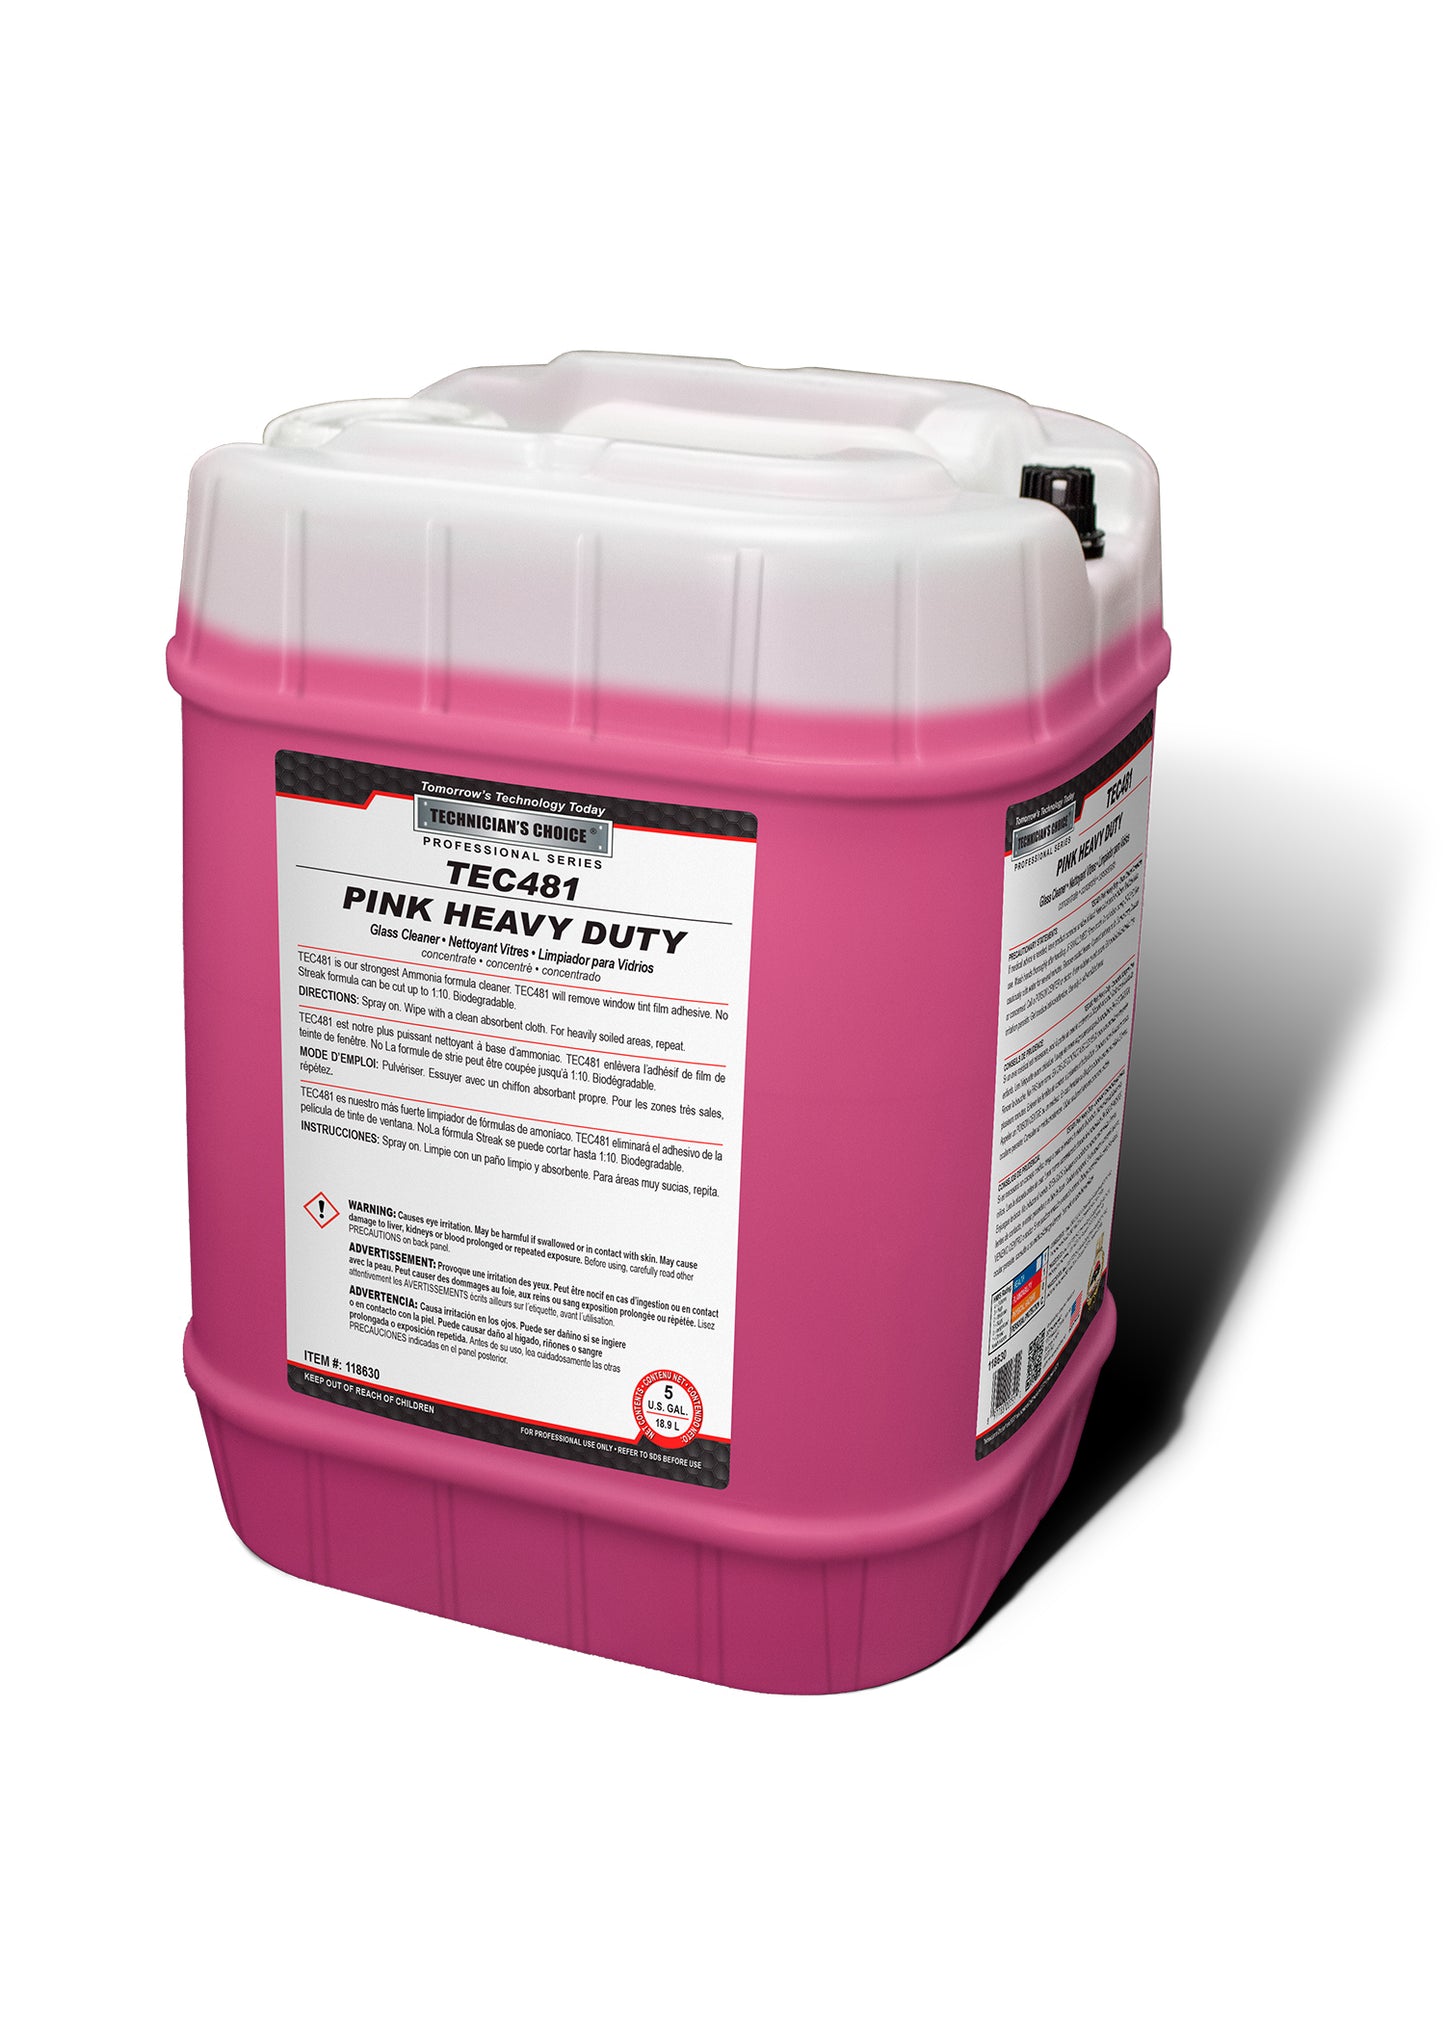 PINK HEAVY DUTY GLASS CLEANER